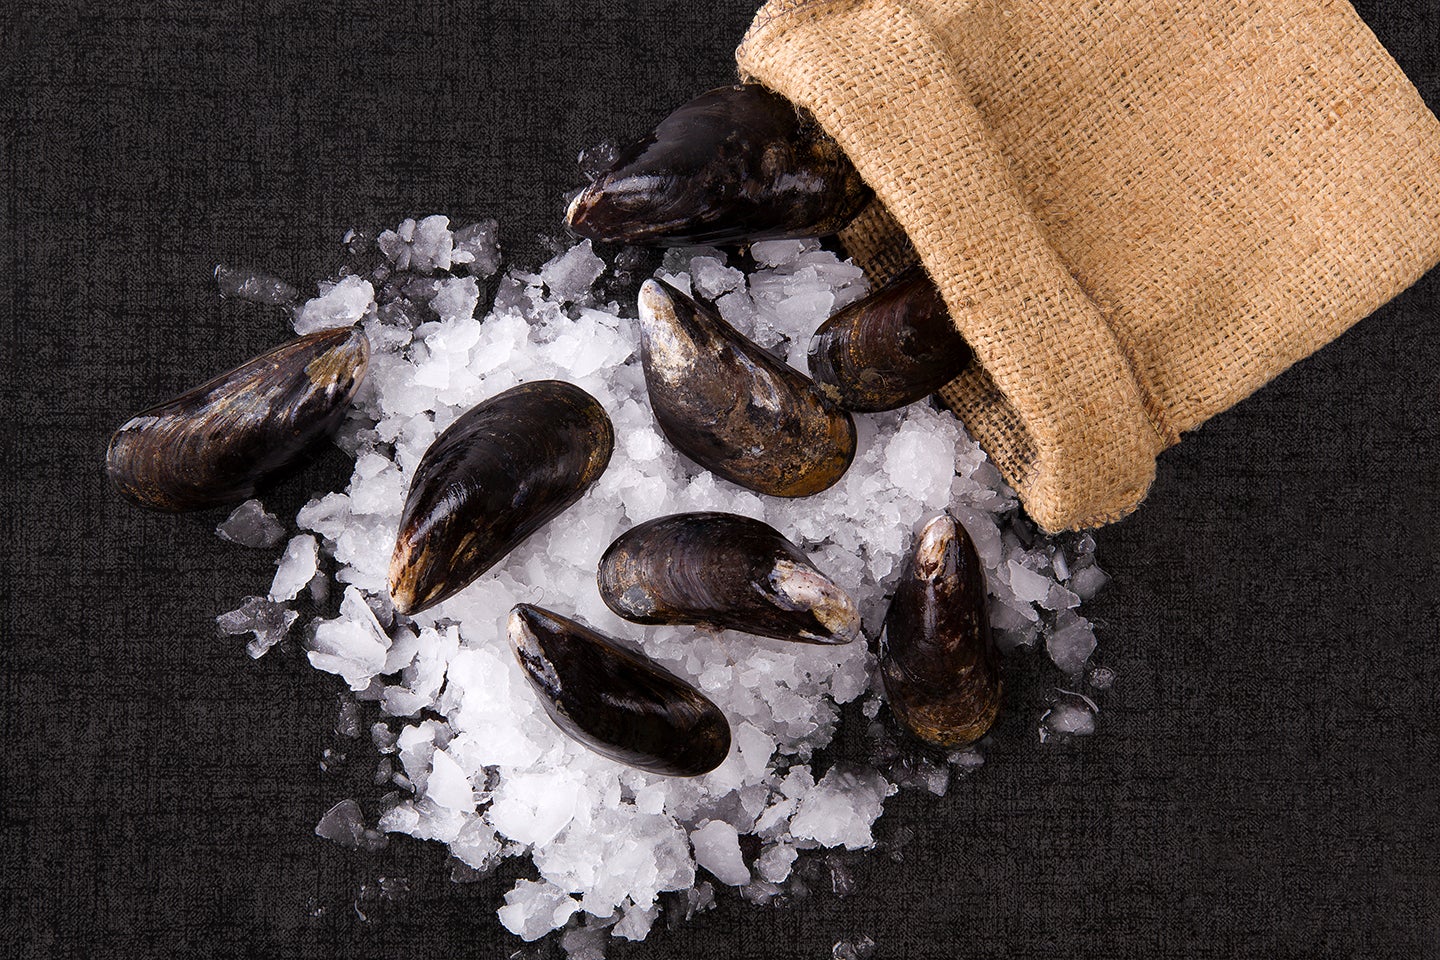 mussels on ice